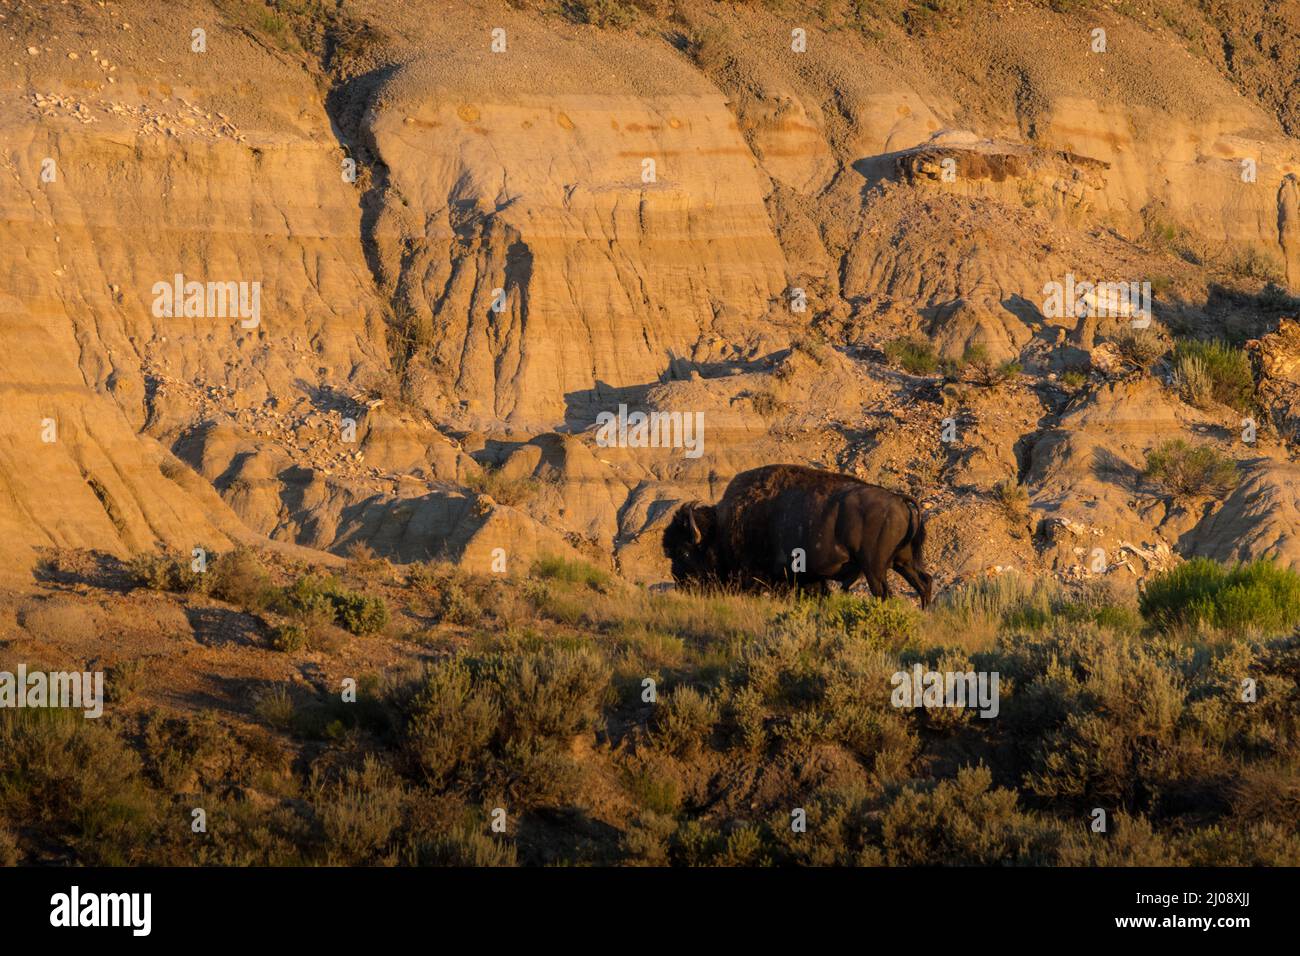 A bison with the badlands in the background in Theodore Roosevelt National Park, North Dakota. Stock Photo